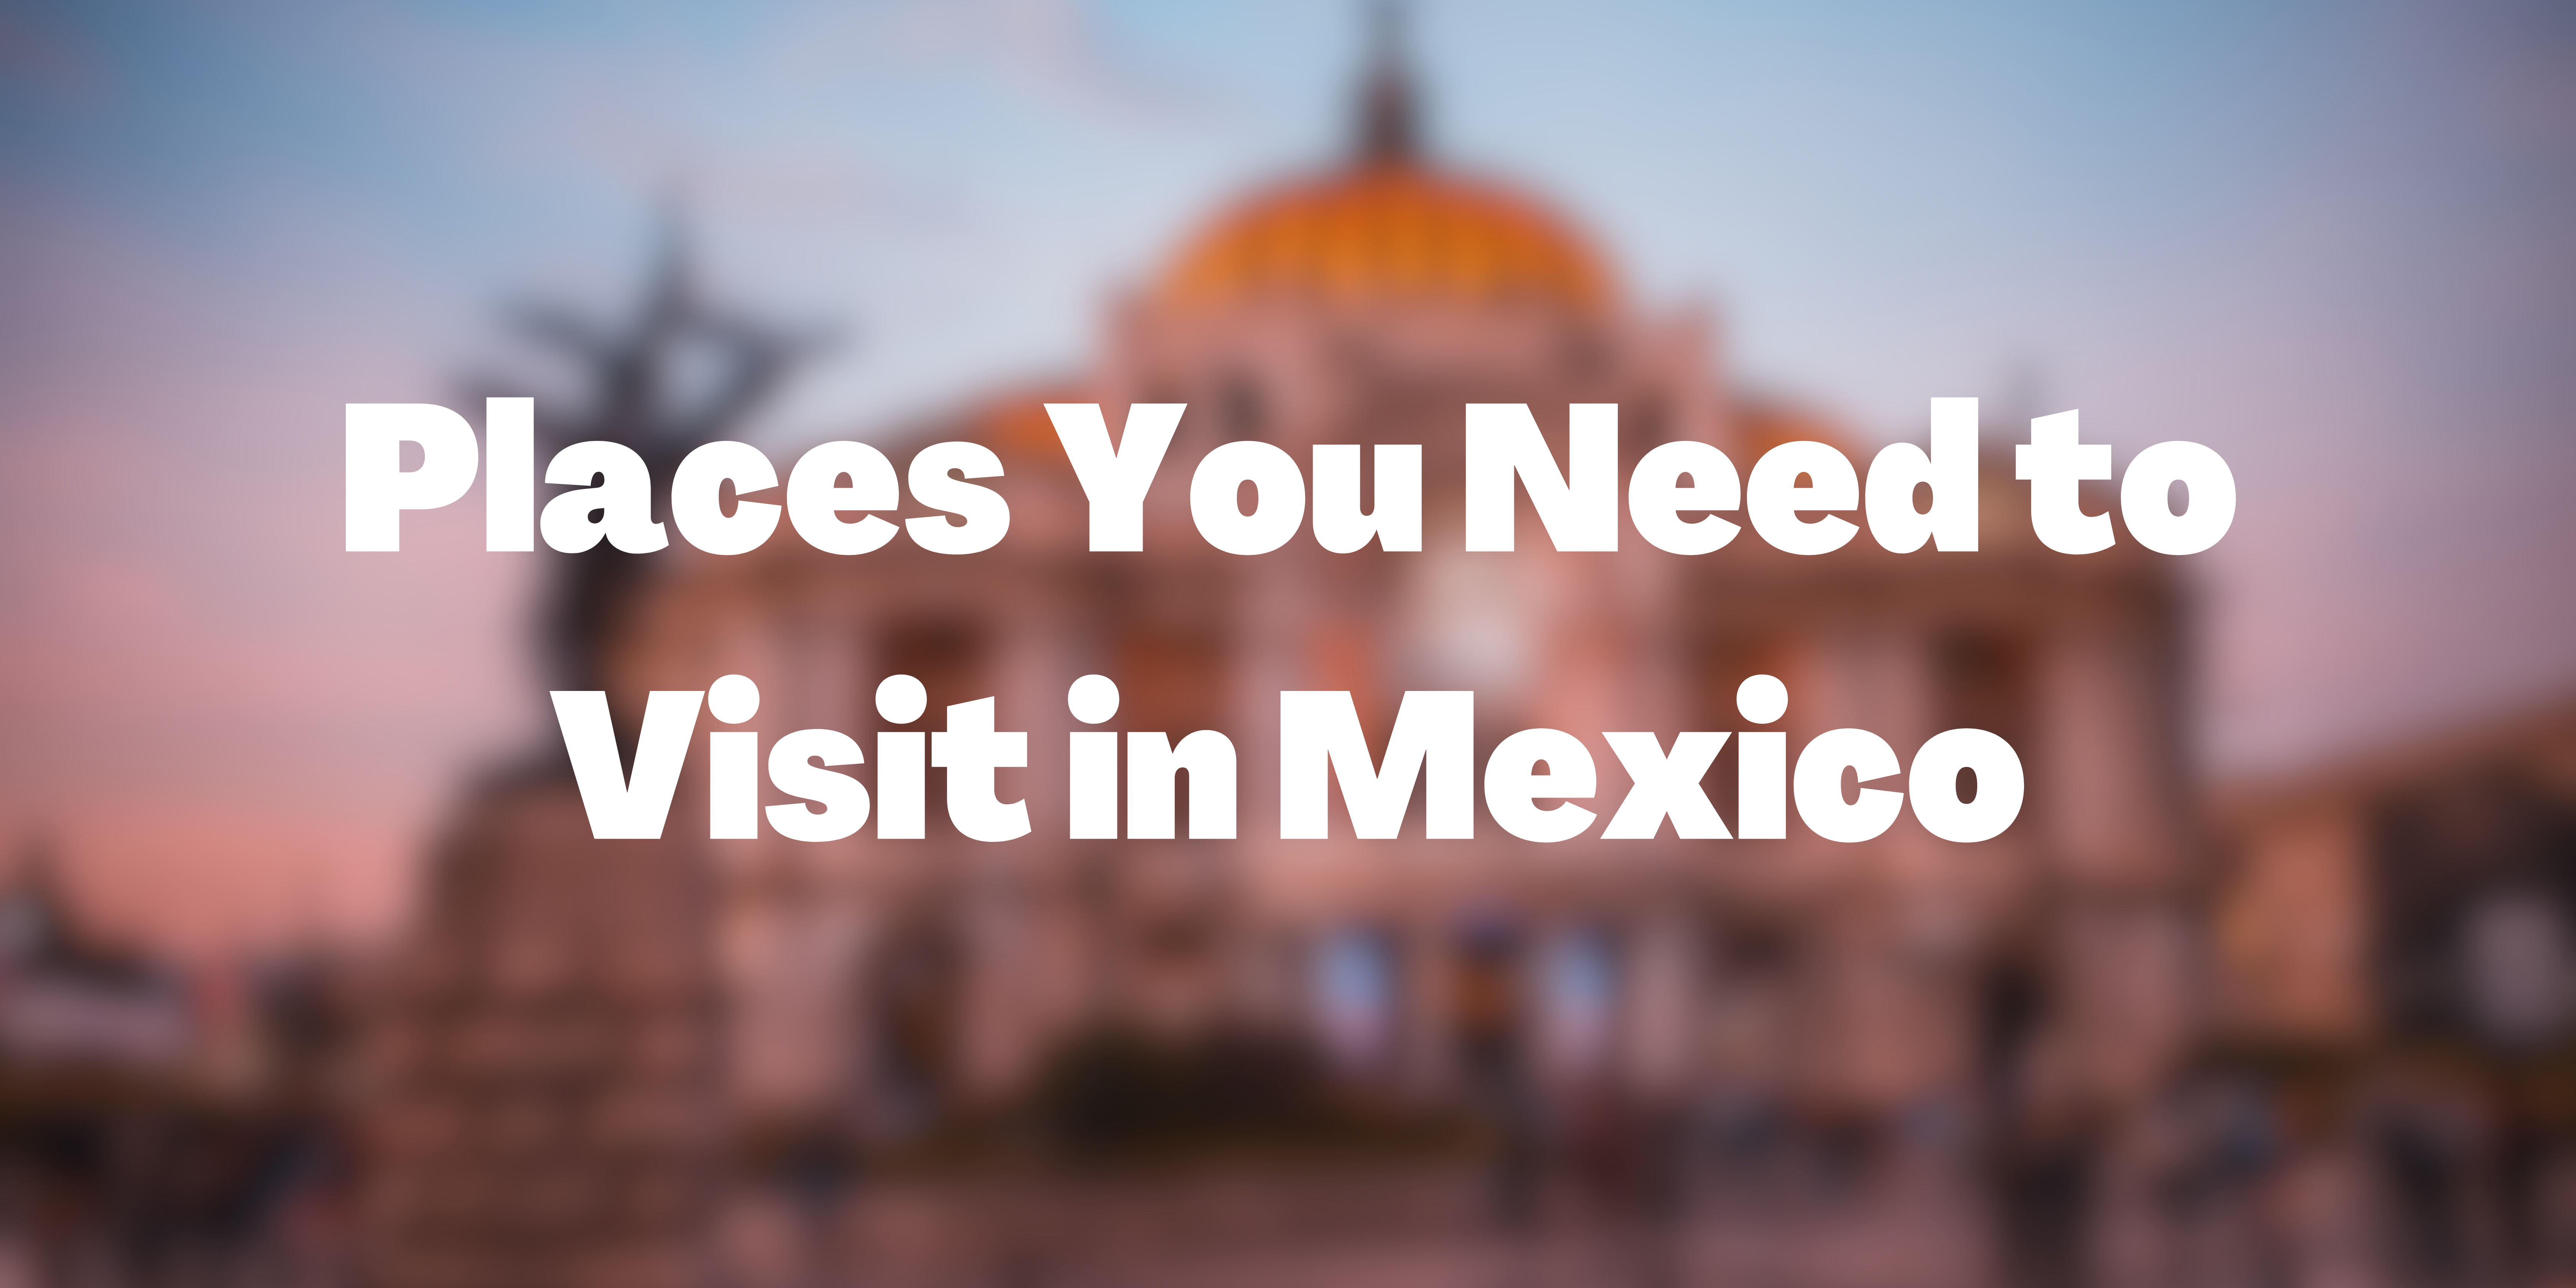 Places you need to visit in Mexico